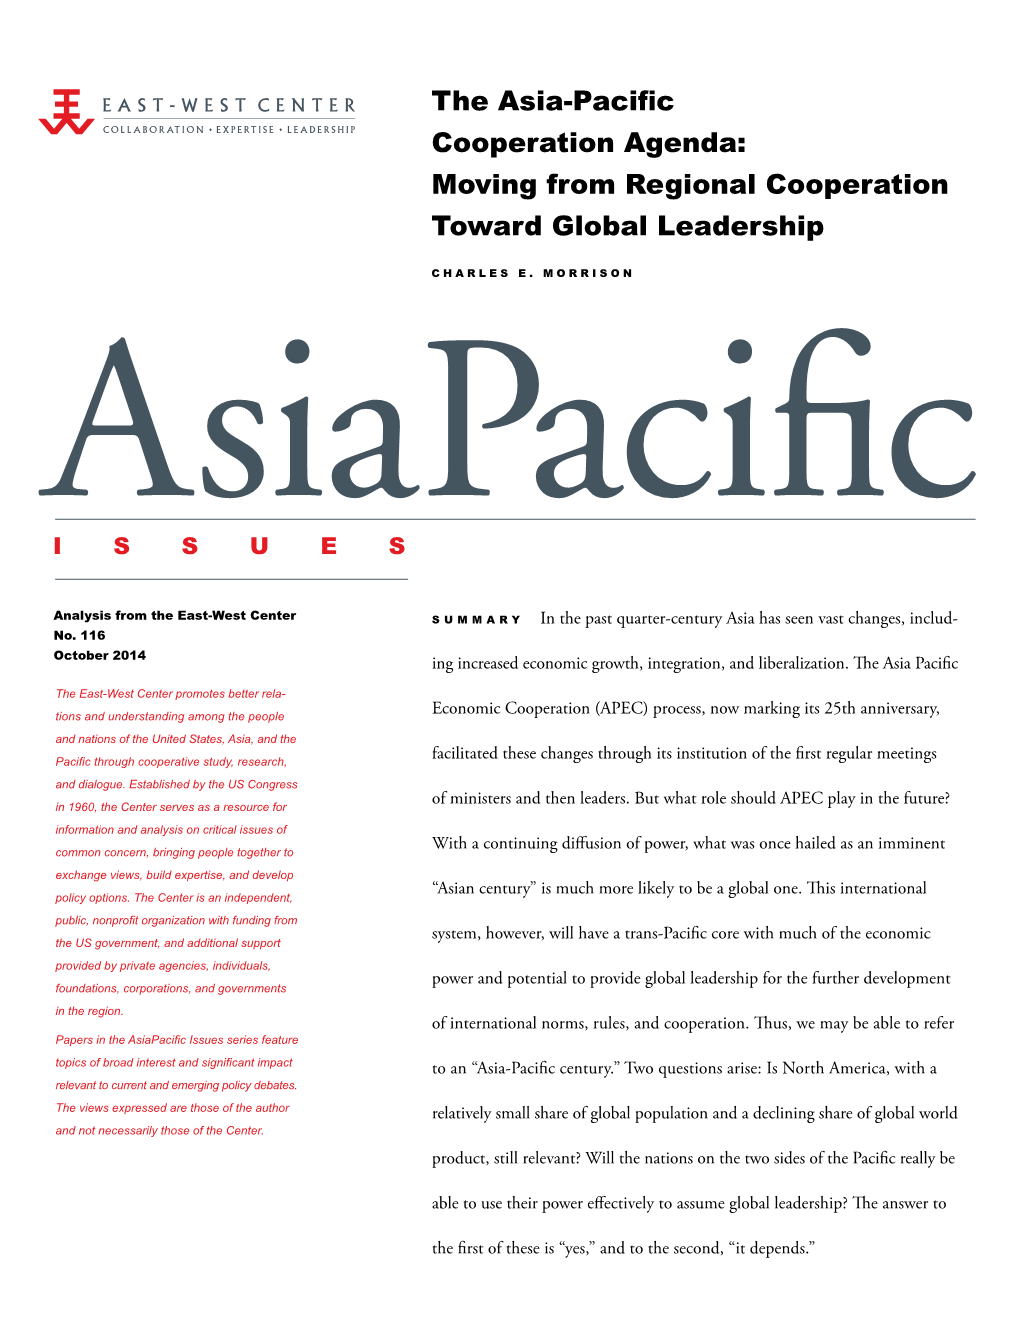 The Asia-Pacific Cooperation Agenda: Moving from Regional Cooperation Toward Global Leadership